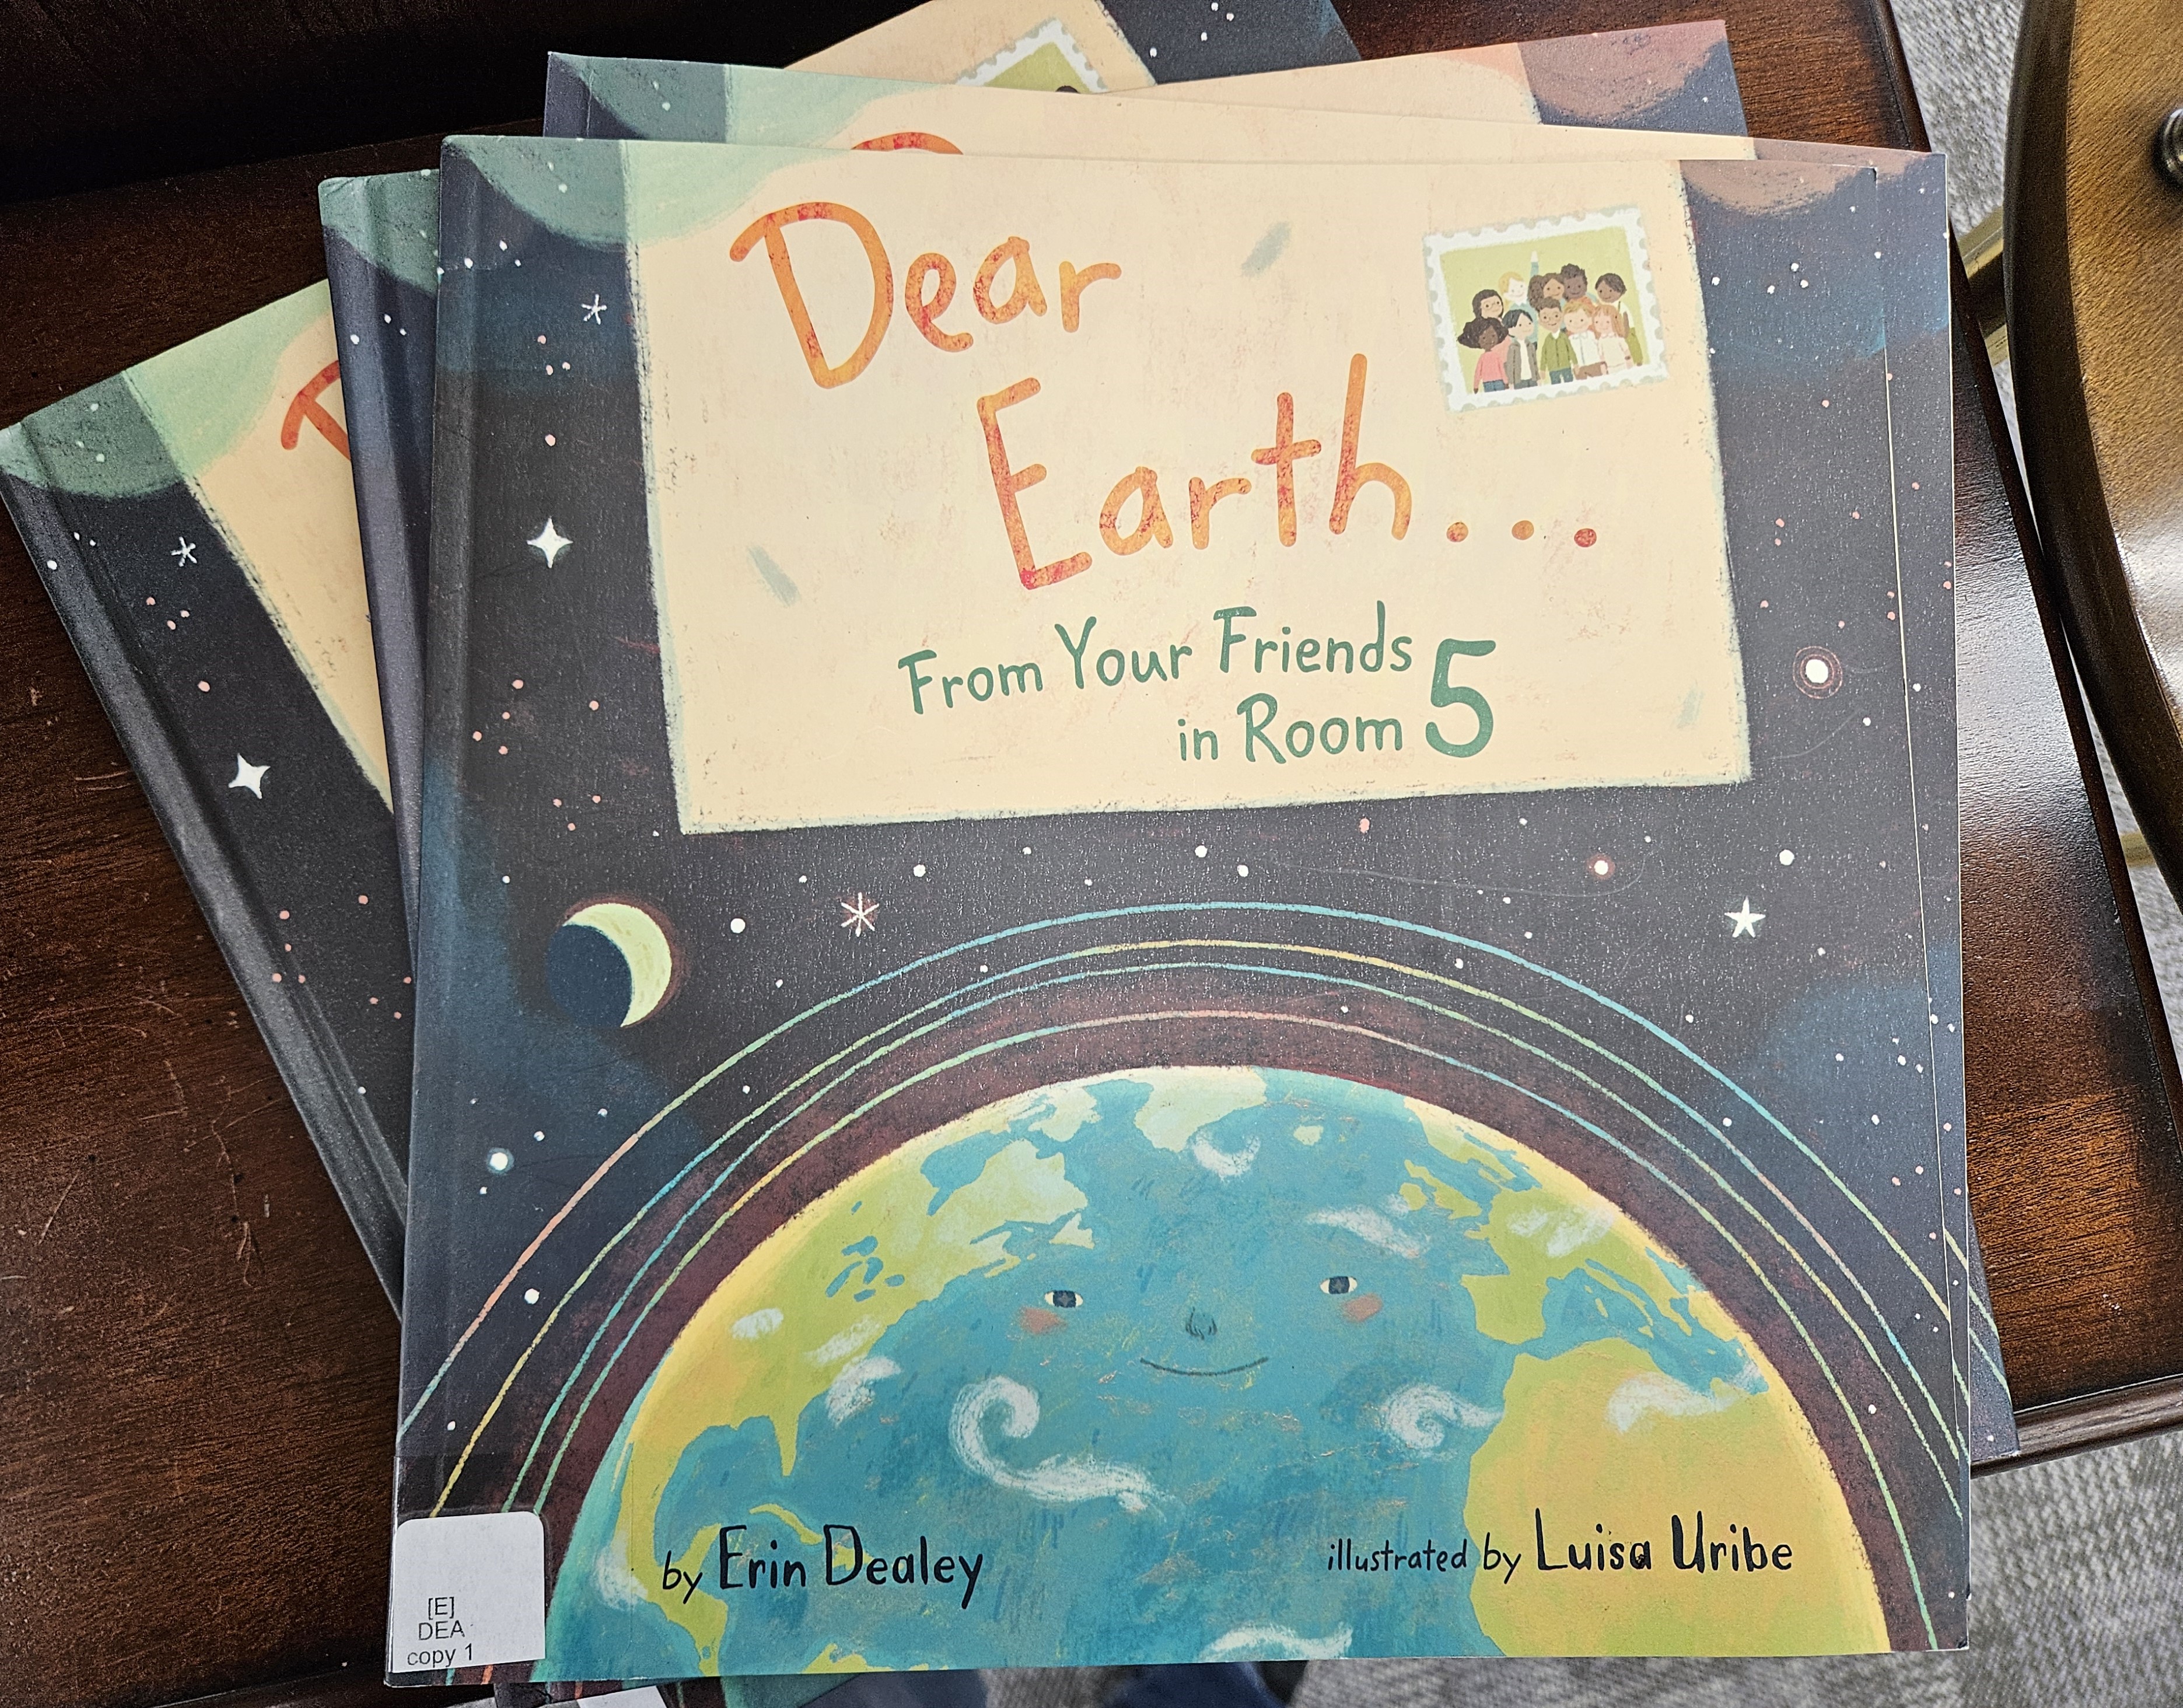 One Community One Book - Dear Earth.... From Your Friends in Room 5